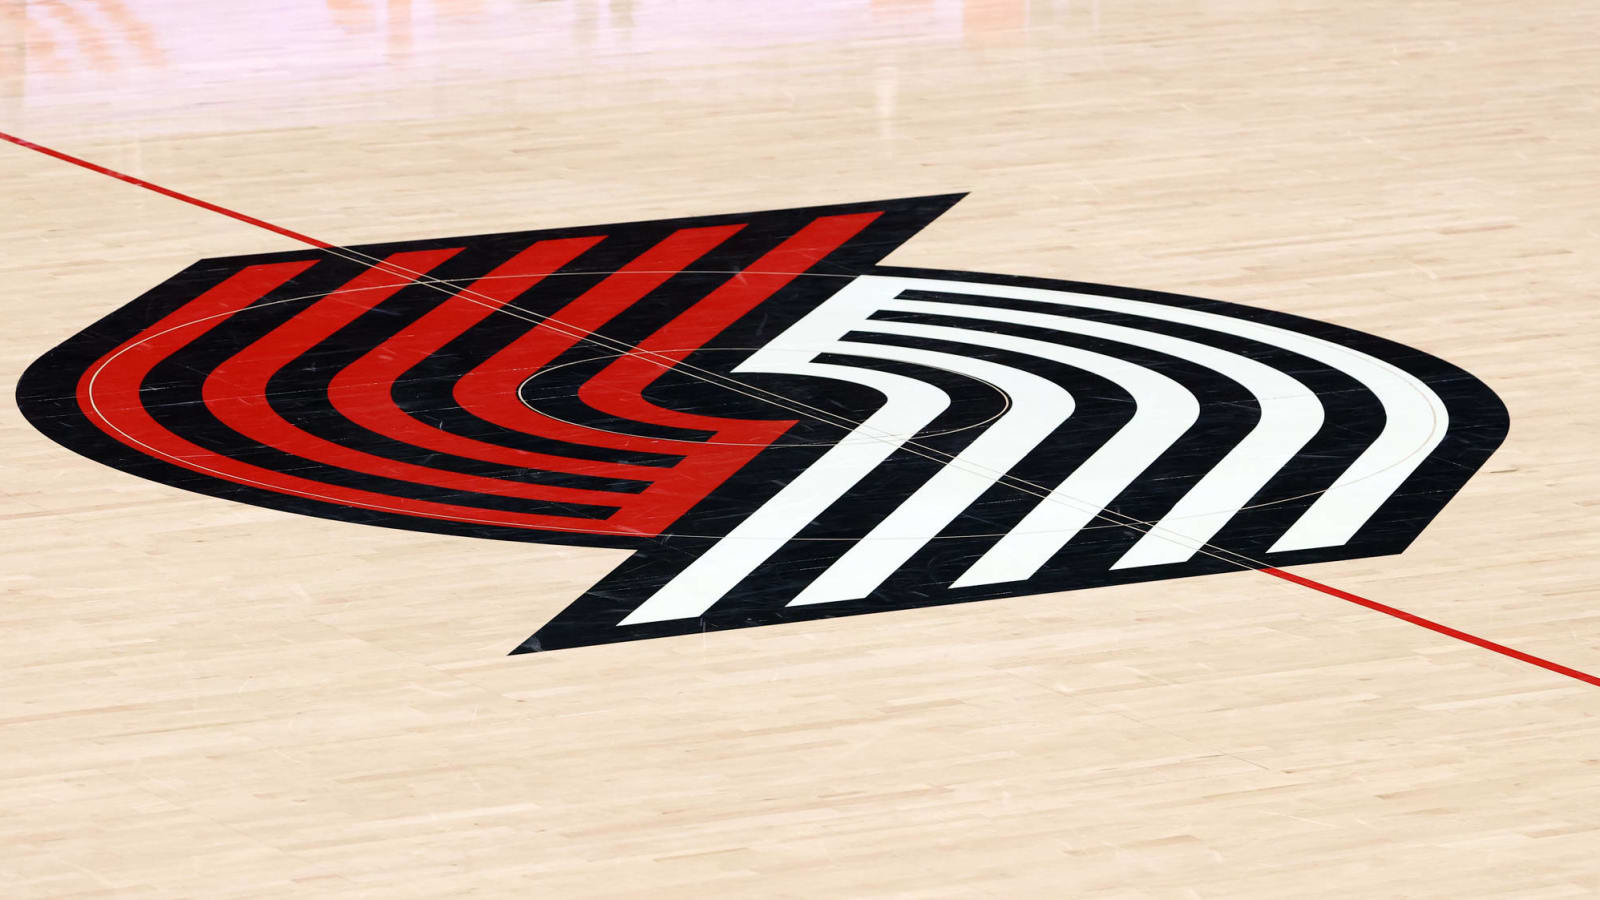 Chris McGowan resigns from role as Trail Blazers president